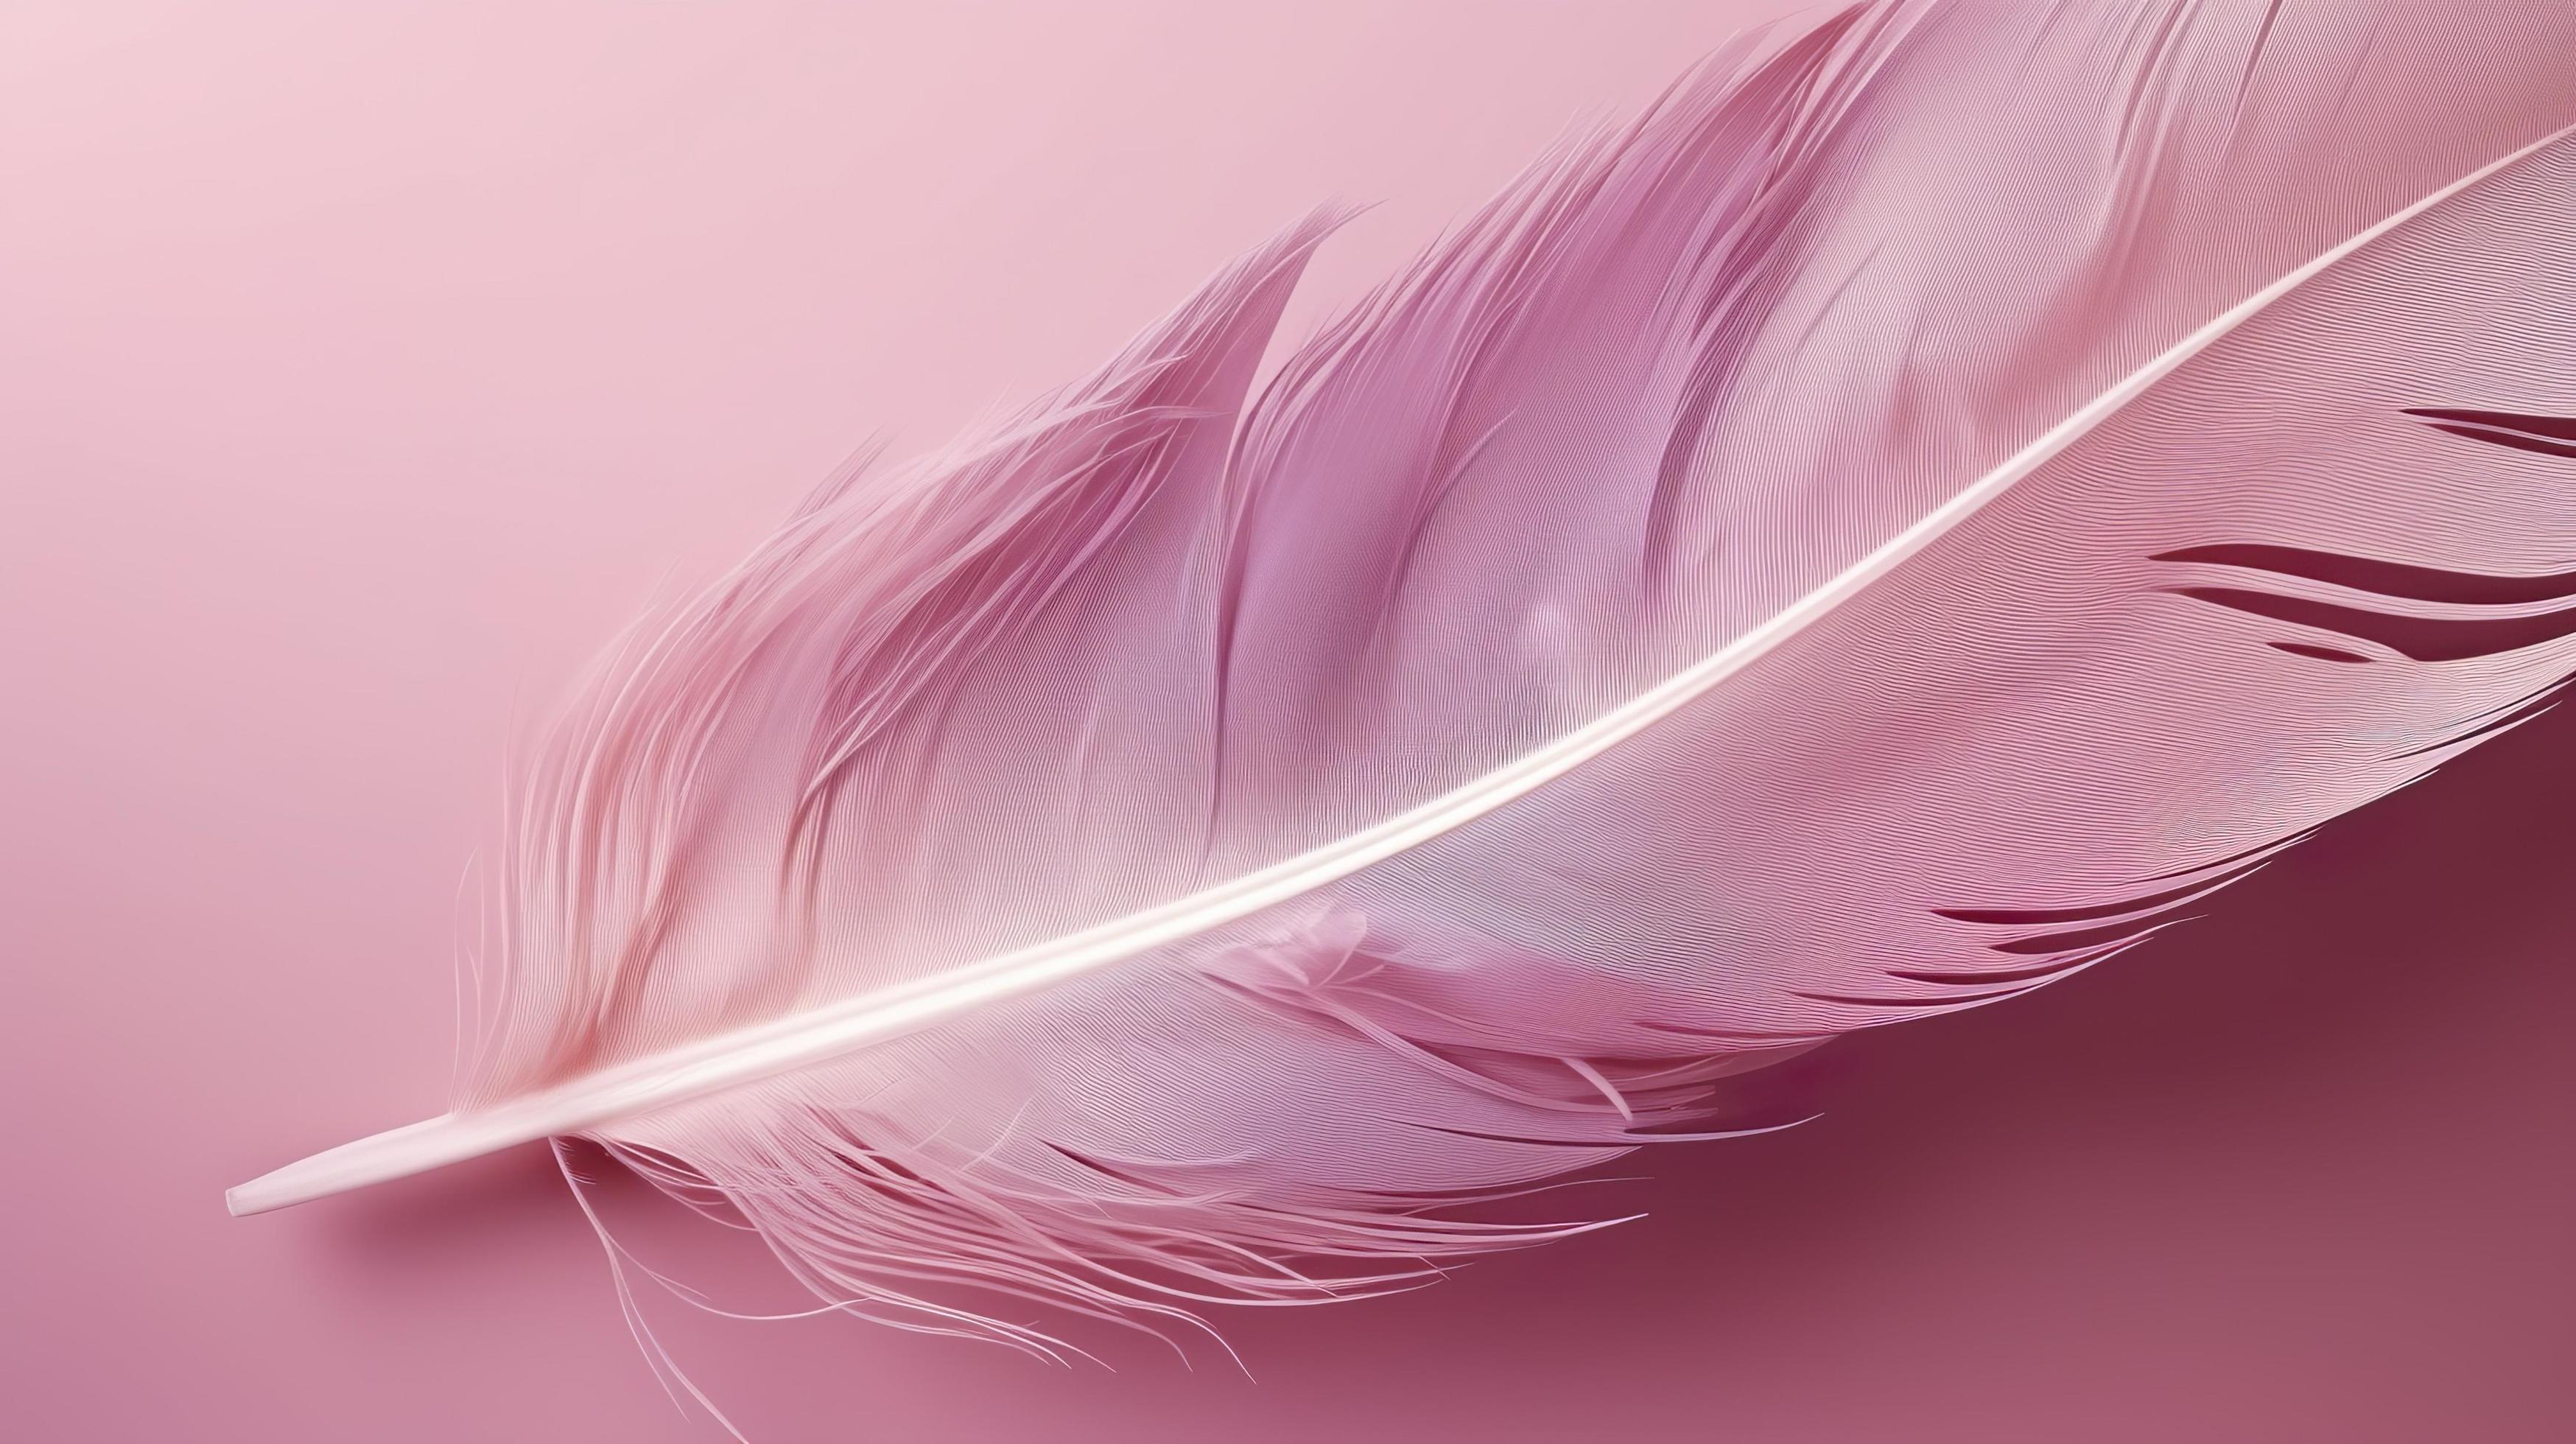 coloured feathers in pink on the background, in the style of subtle shading, anime aesthetic, wallpaper, pigeoncore, free brushwork, translucent color